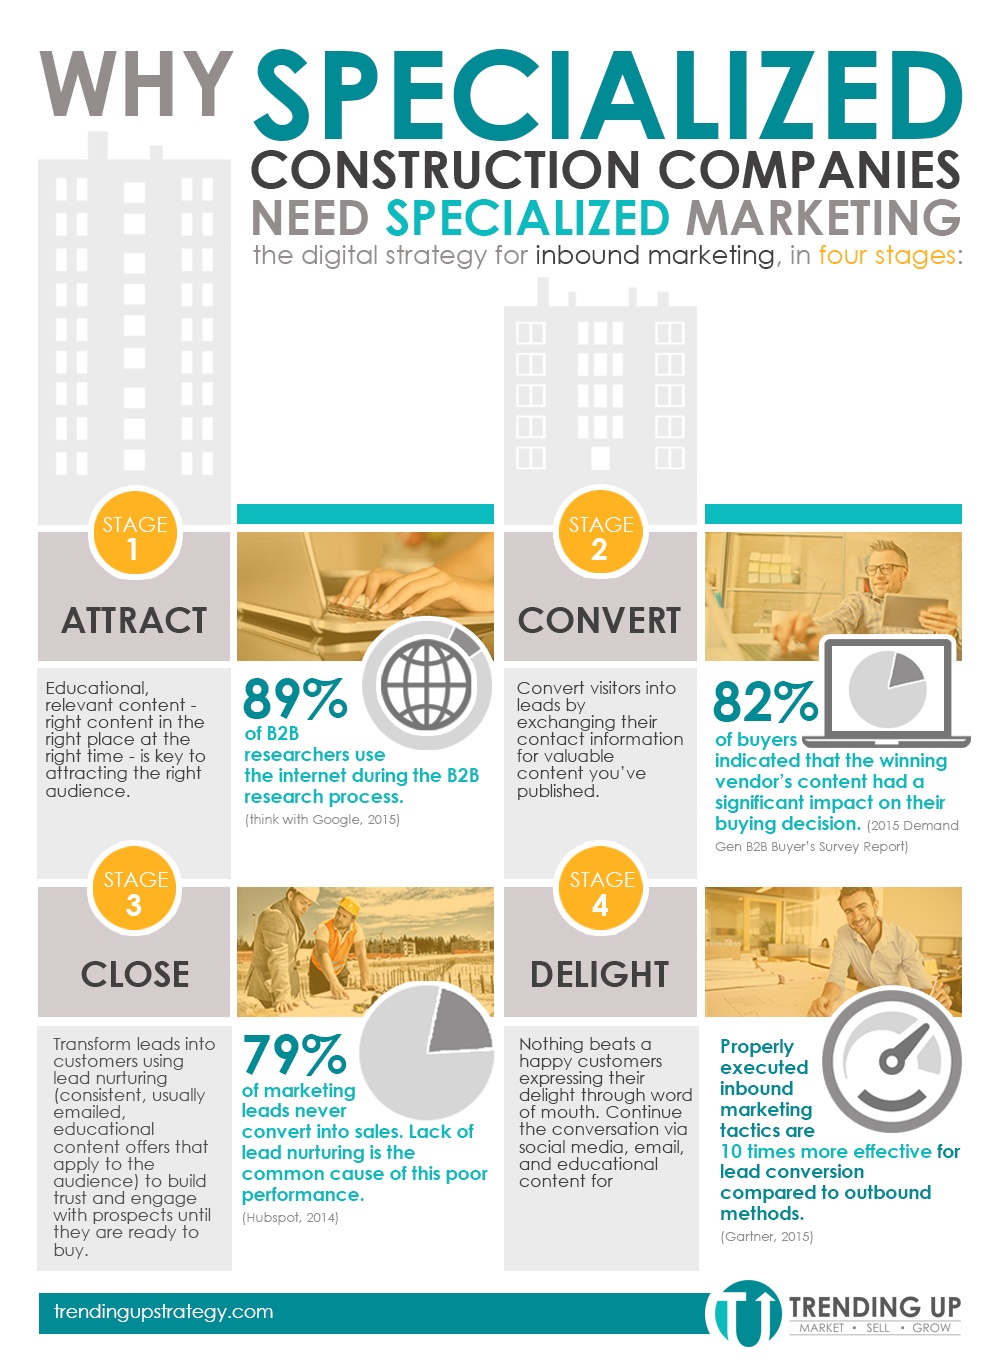 specialized-construction-needs-specialized-marketing-infographic.jpg